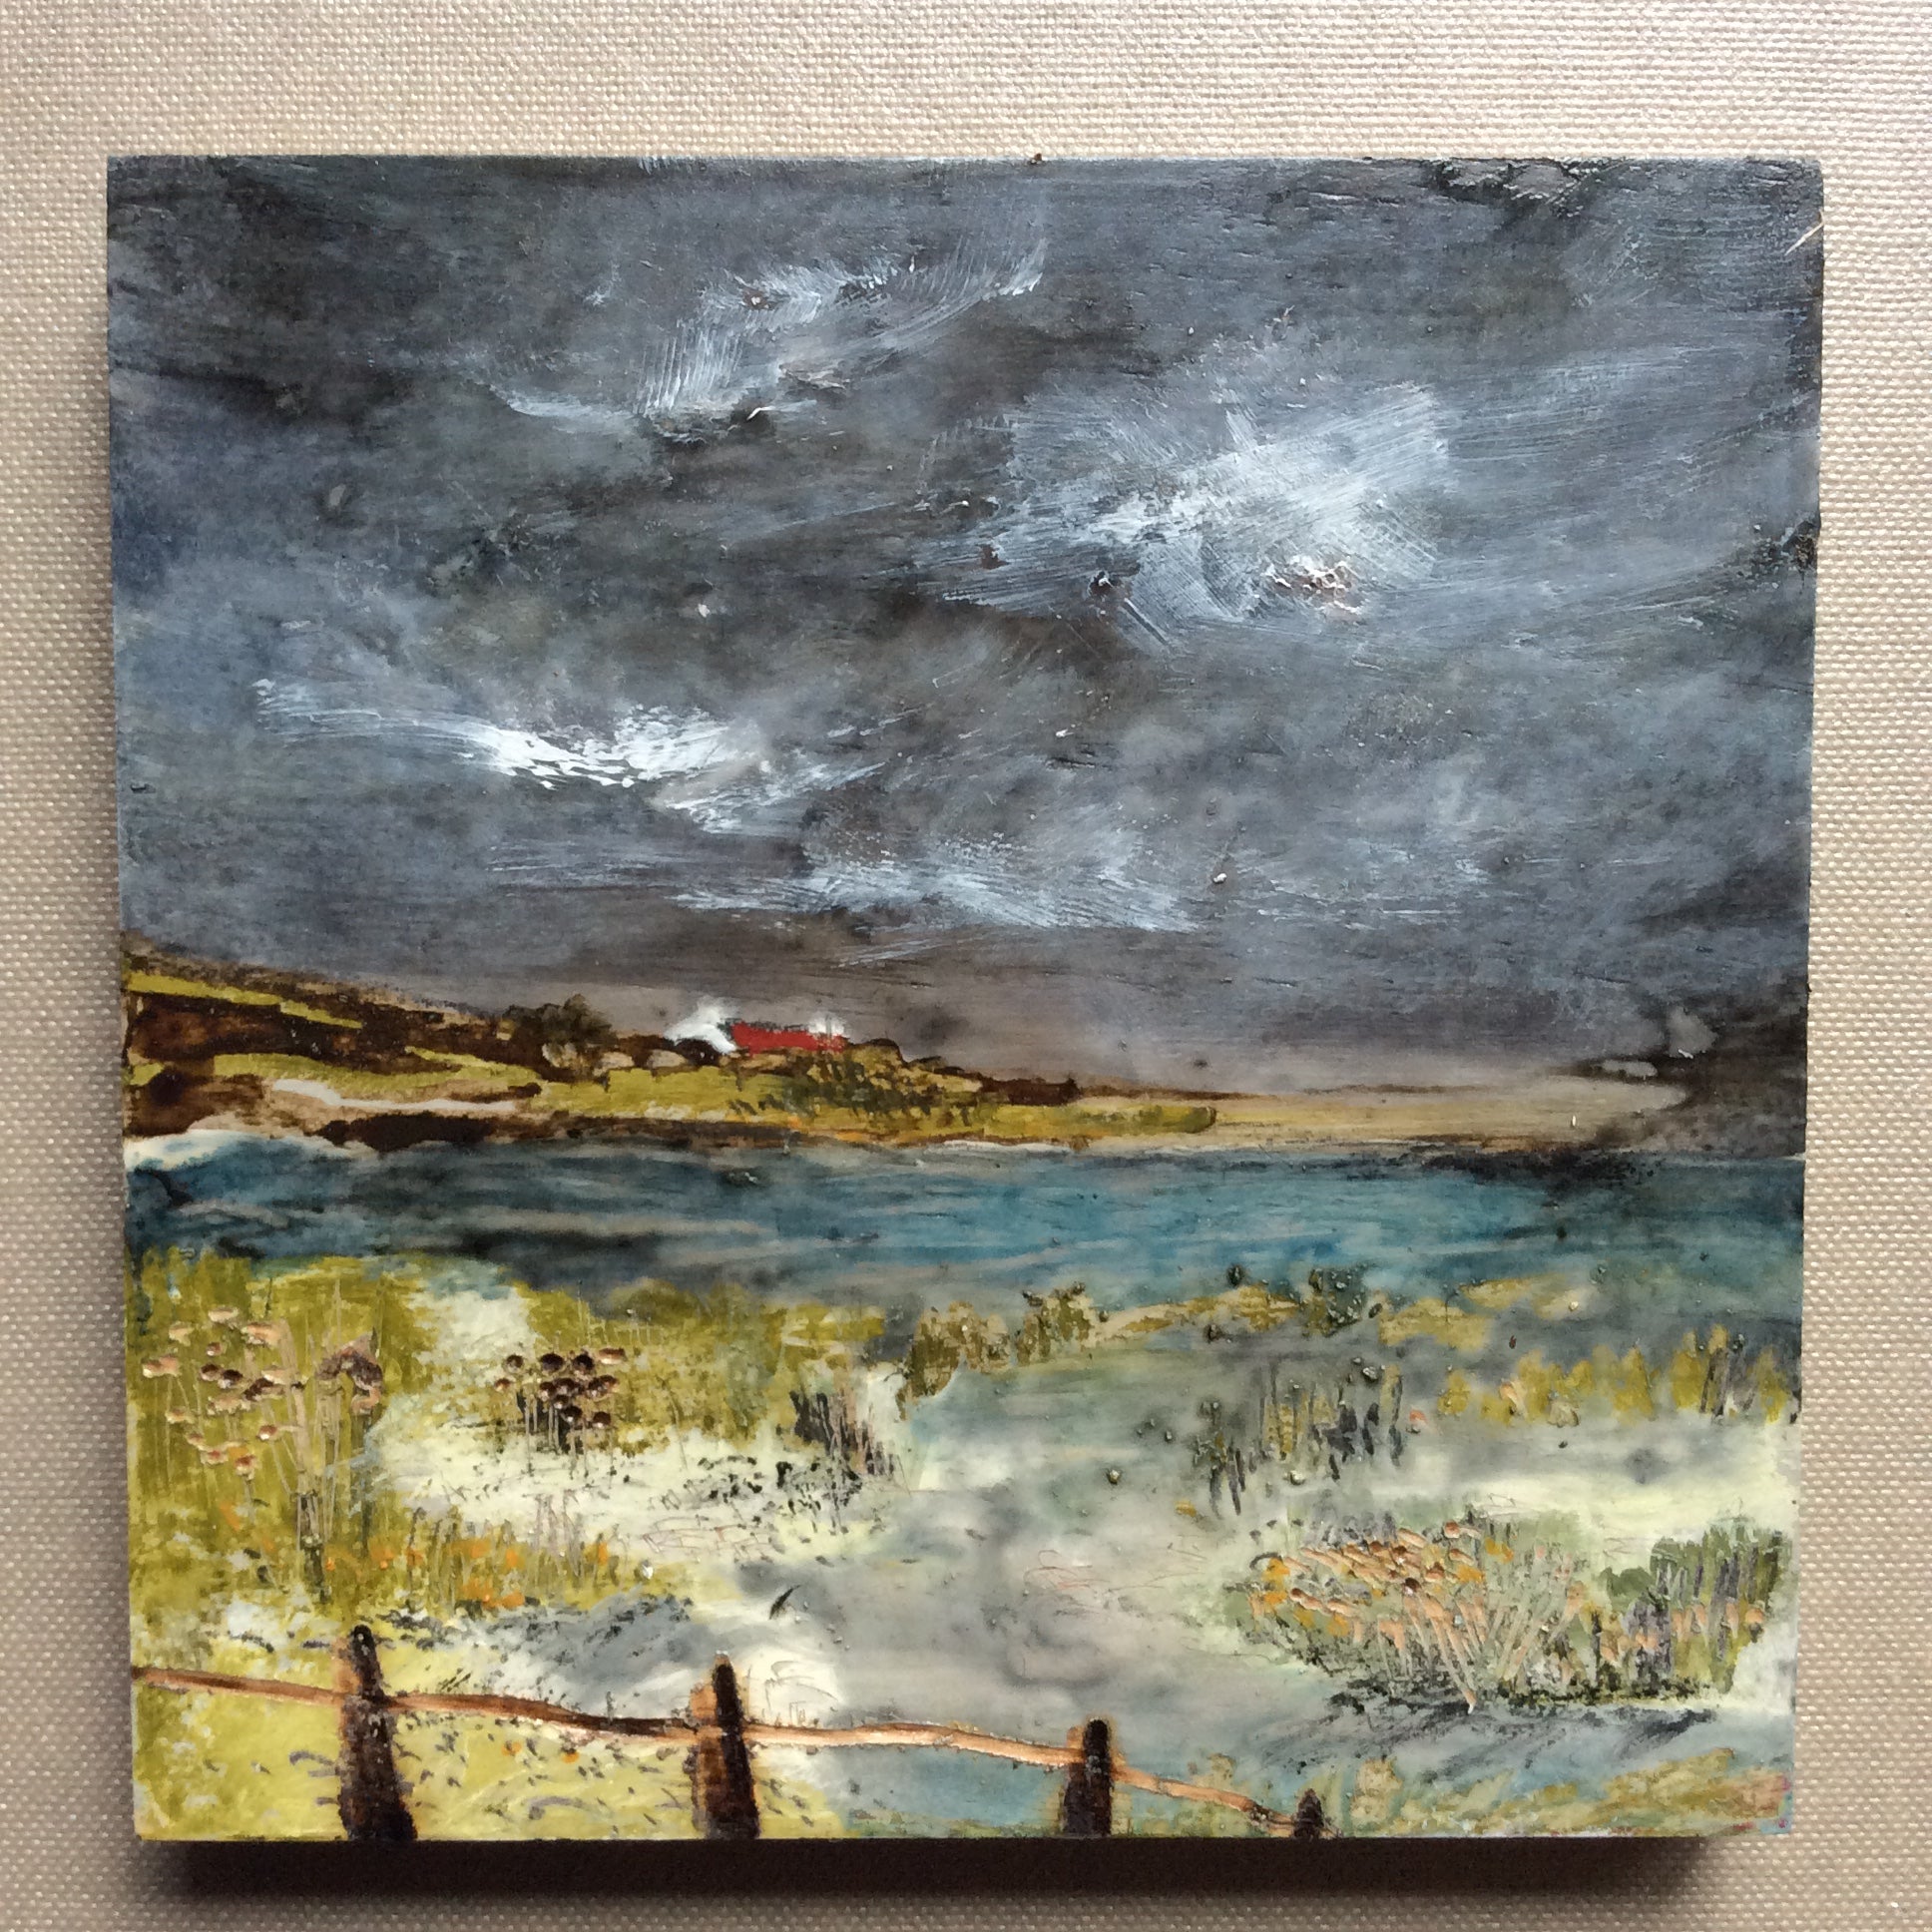 Mixed Media Art on wood By Louise O'Hara - "Another storm came heading in”